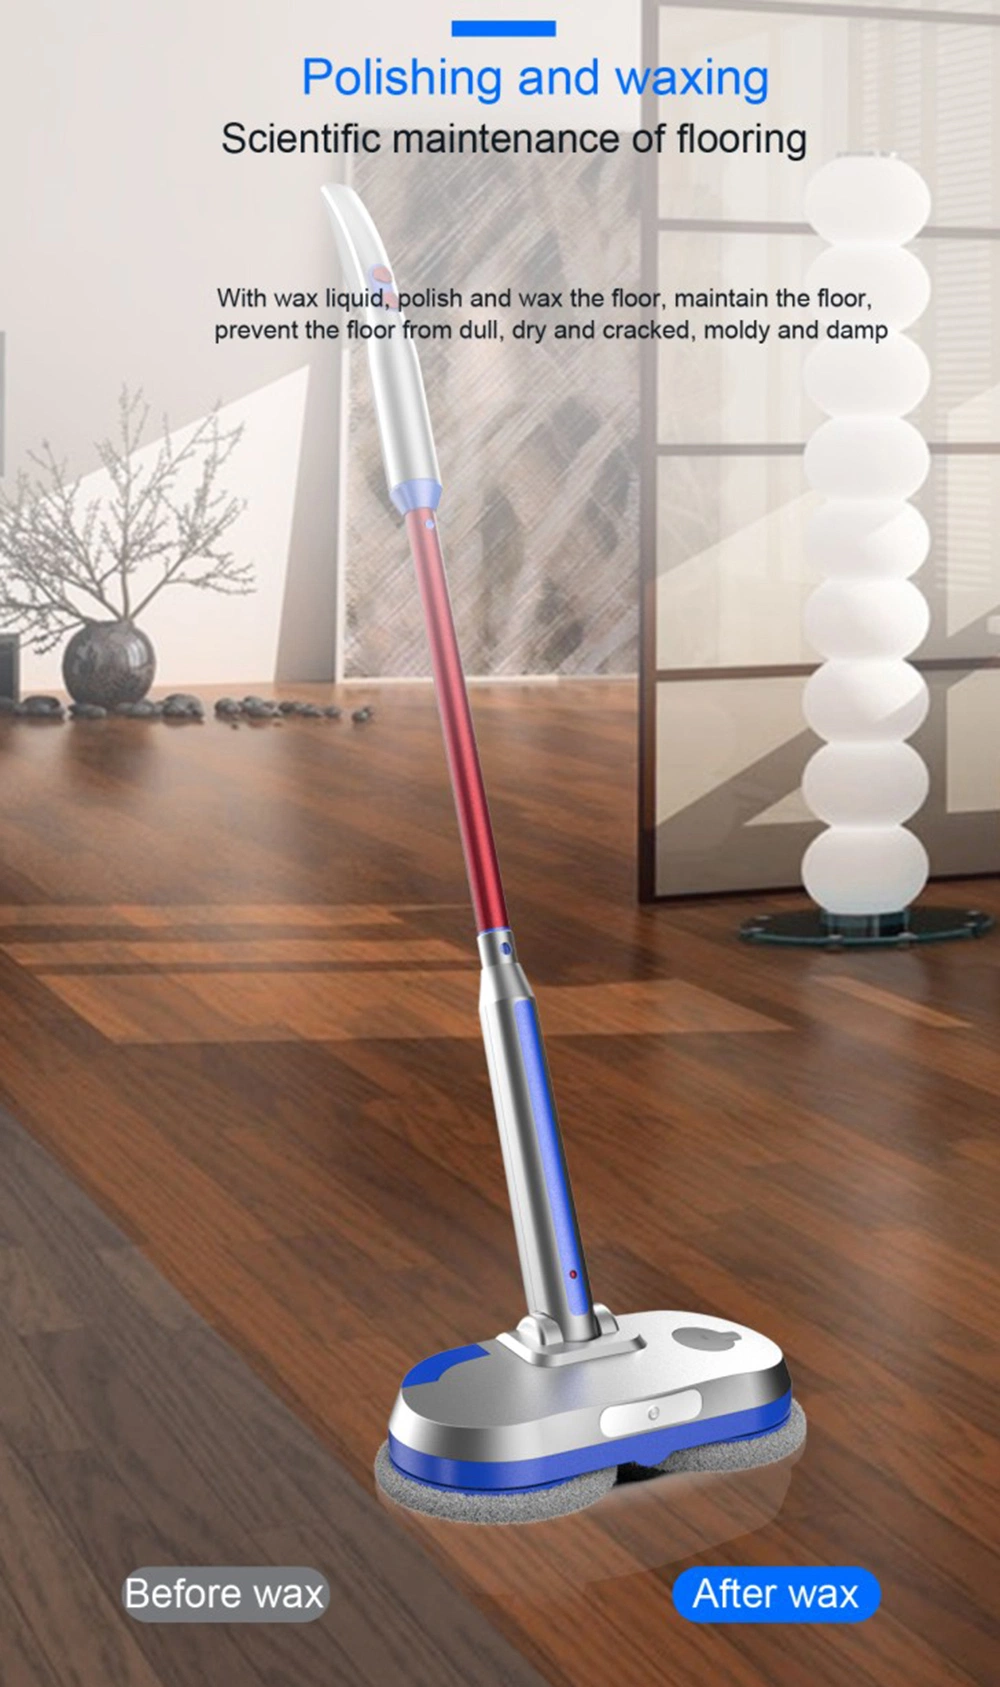 Cordless Electric Mop, Spray Mops for Floor Cleaning with Built-in Water Tank &amp; LED Headlight, Rechargeable Spin Polisher for Hardwood/Tile/Marble/Laminate Floo